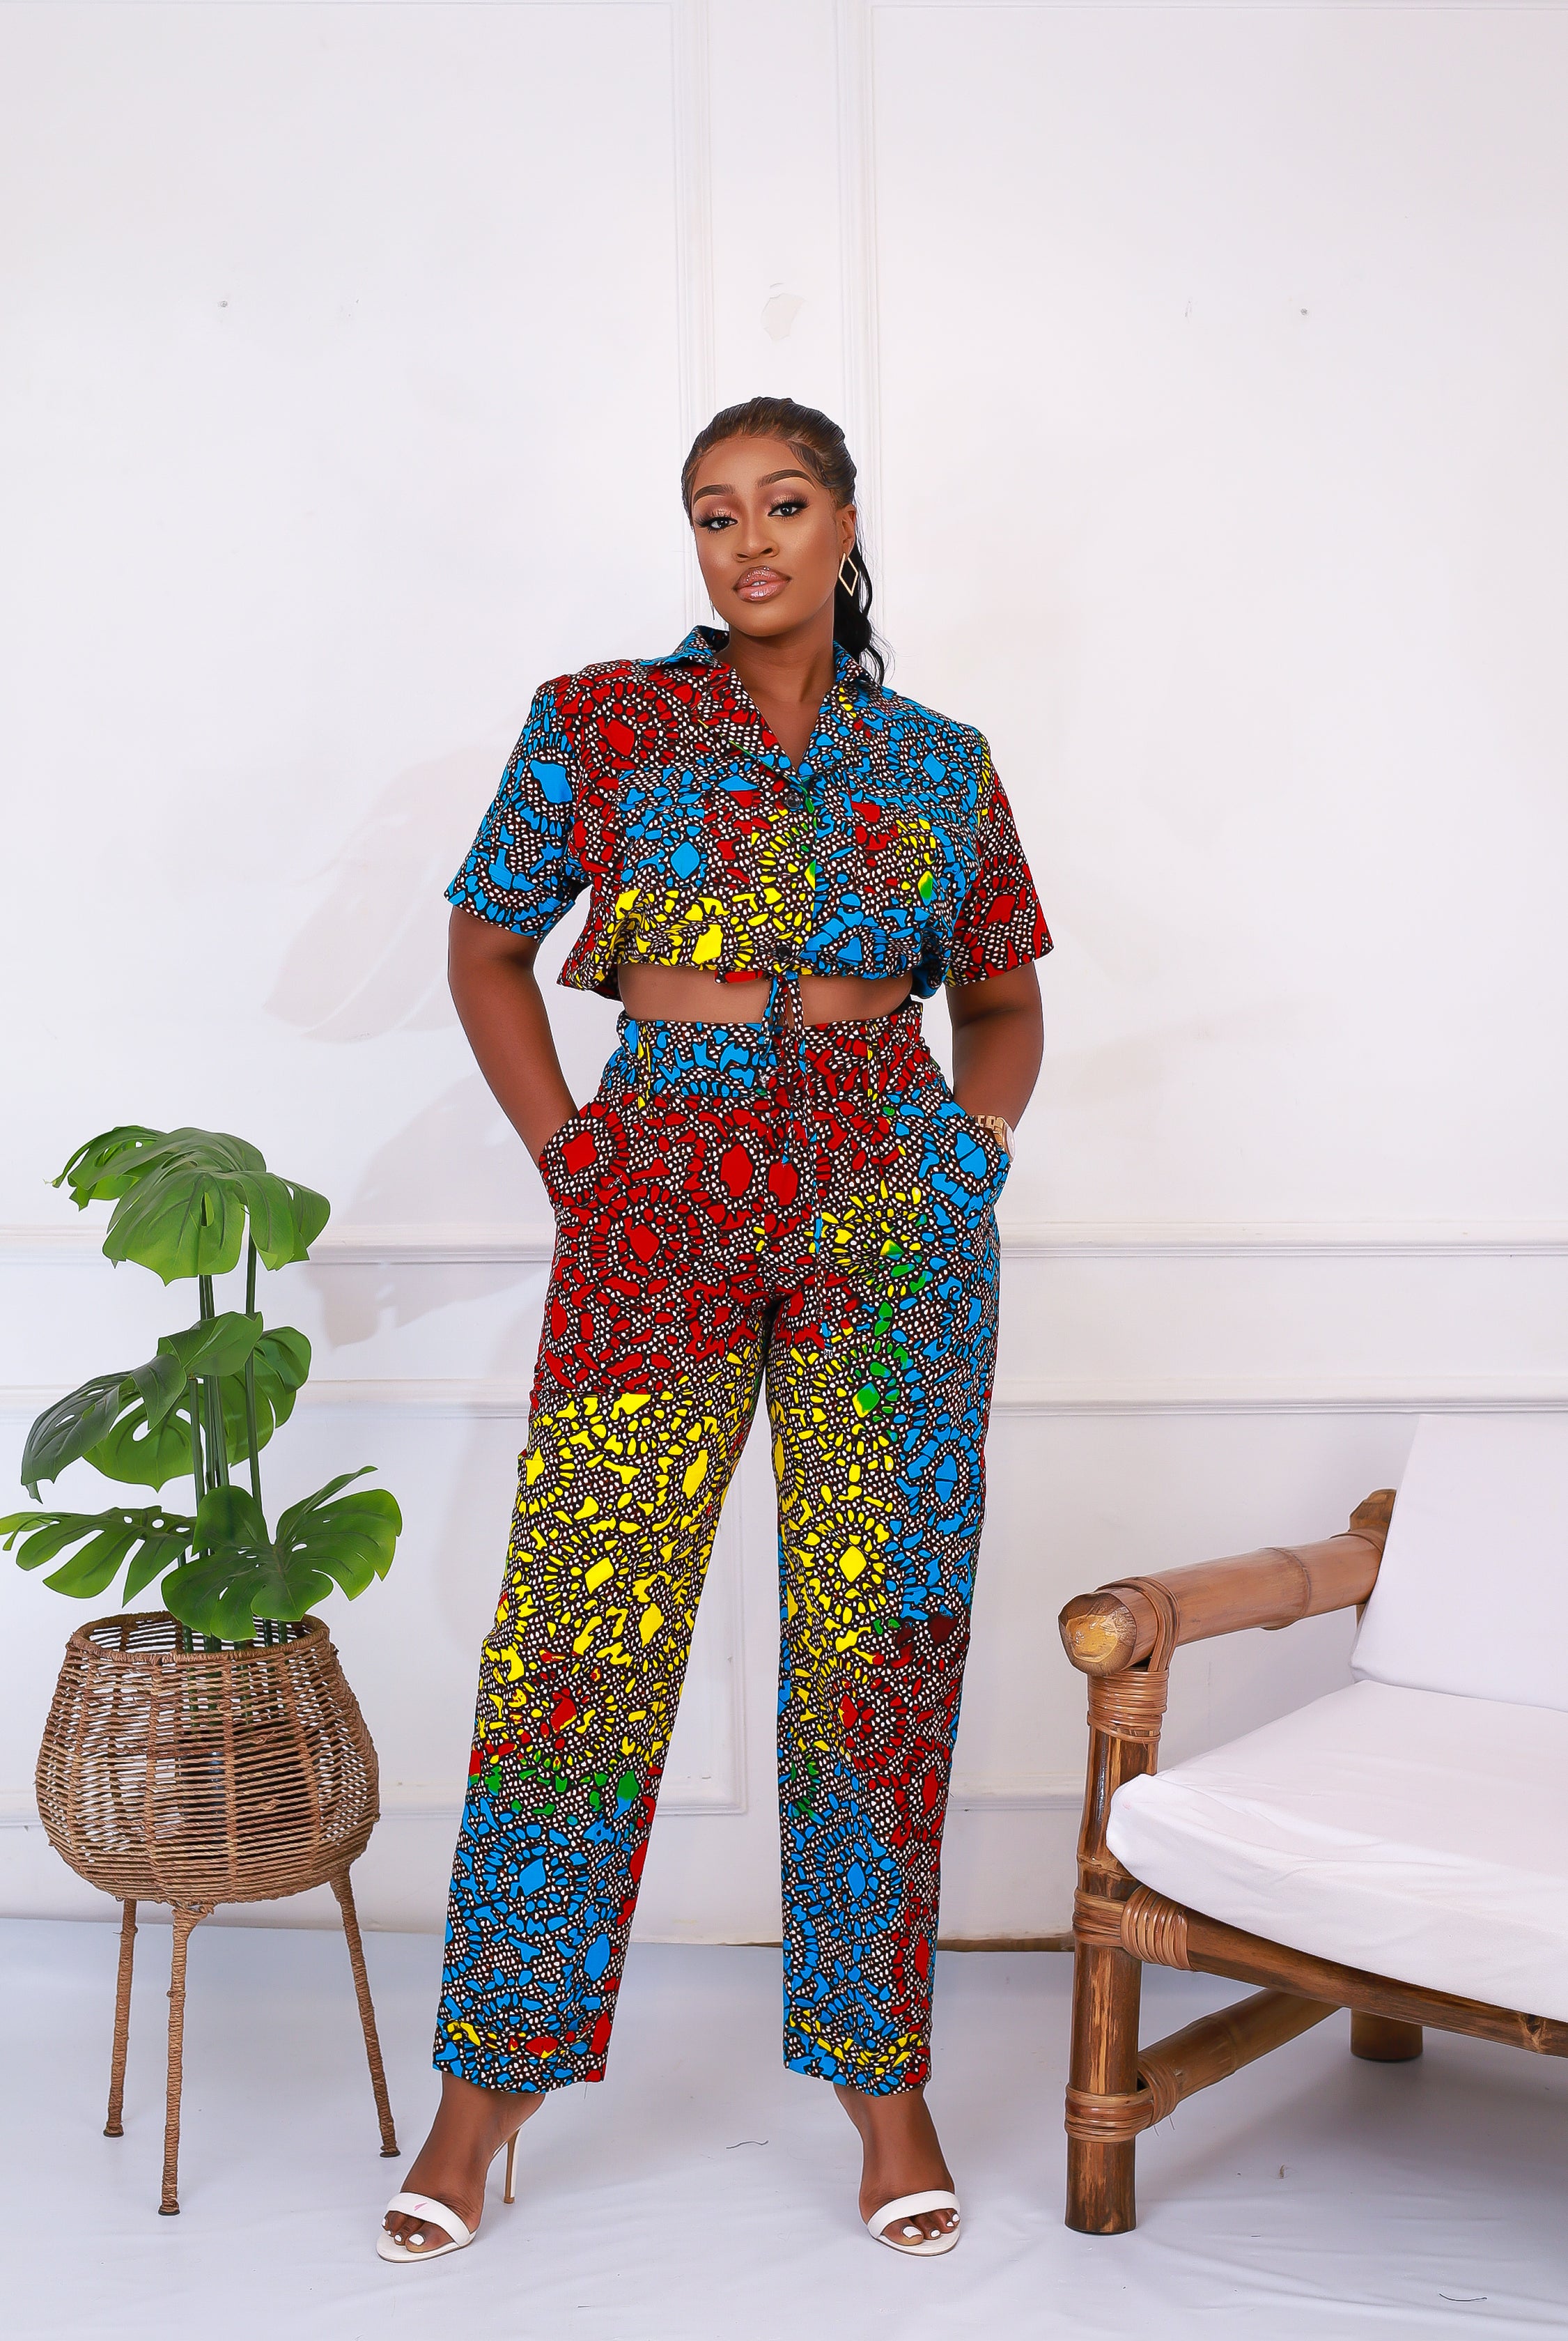 African print wide leg trousers | African print trousers UK | African print pants | African Print wide leg pants | African print clothing UK | Ready to wear African print pants | African Trouser styles | African clothing | African outfit | Ankara print  Trousers | Ankara pants for Women | Ankara Styles Trousers for ladies | African pallazo Trousers | Danshiki Trousers | High waist African print wide leg pants | African high waist pants| African loose fit Trousers | African print Trousers